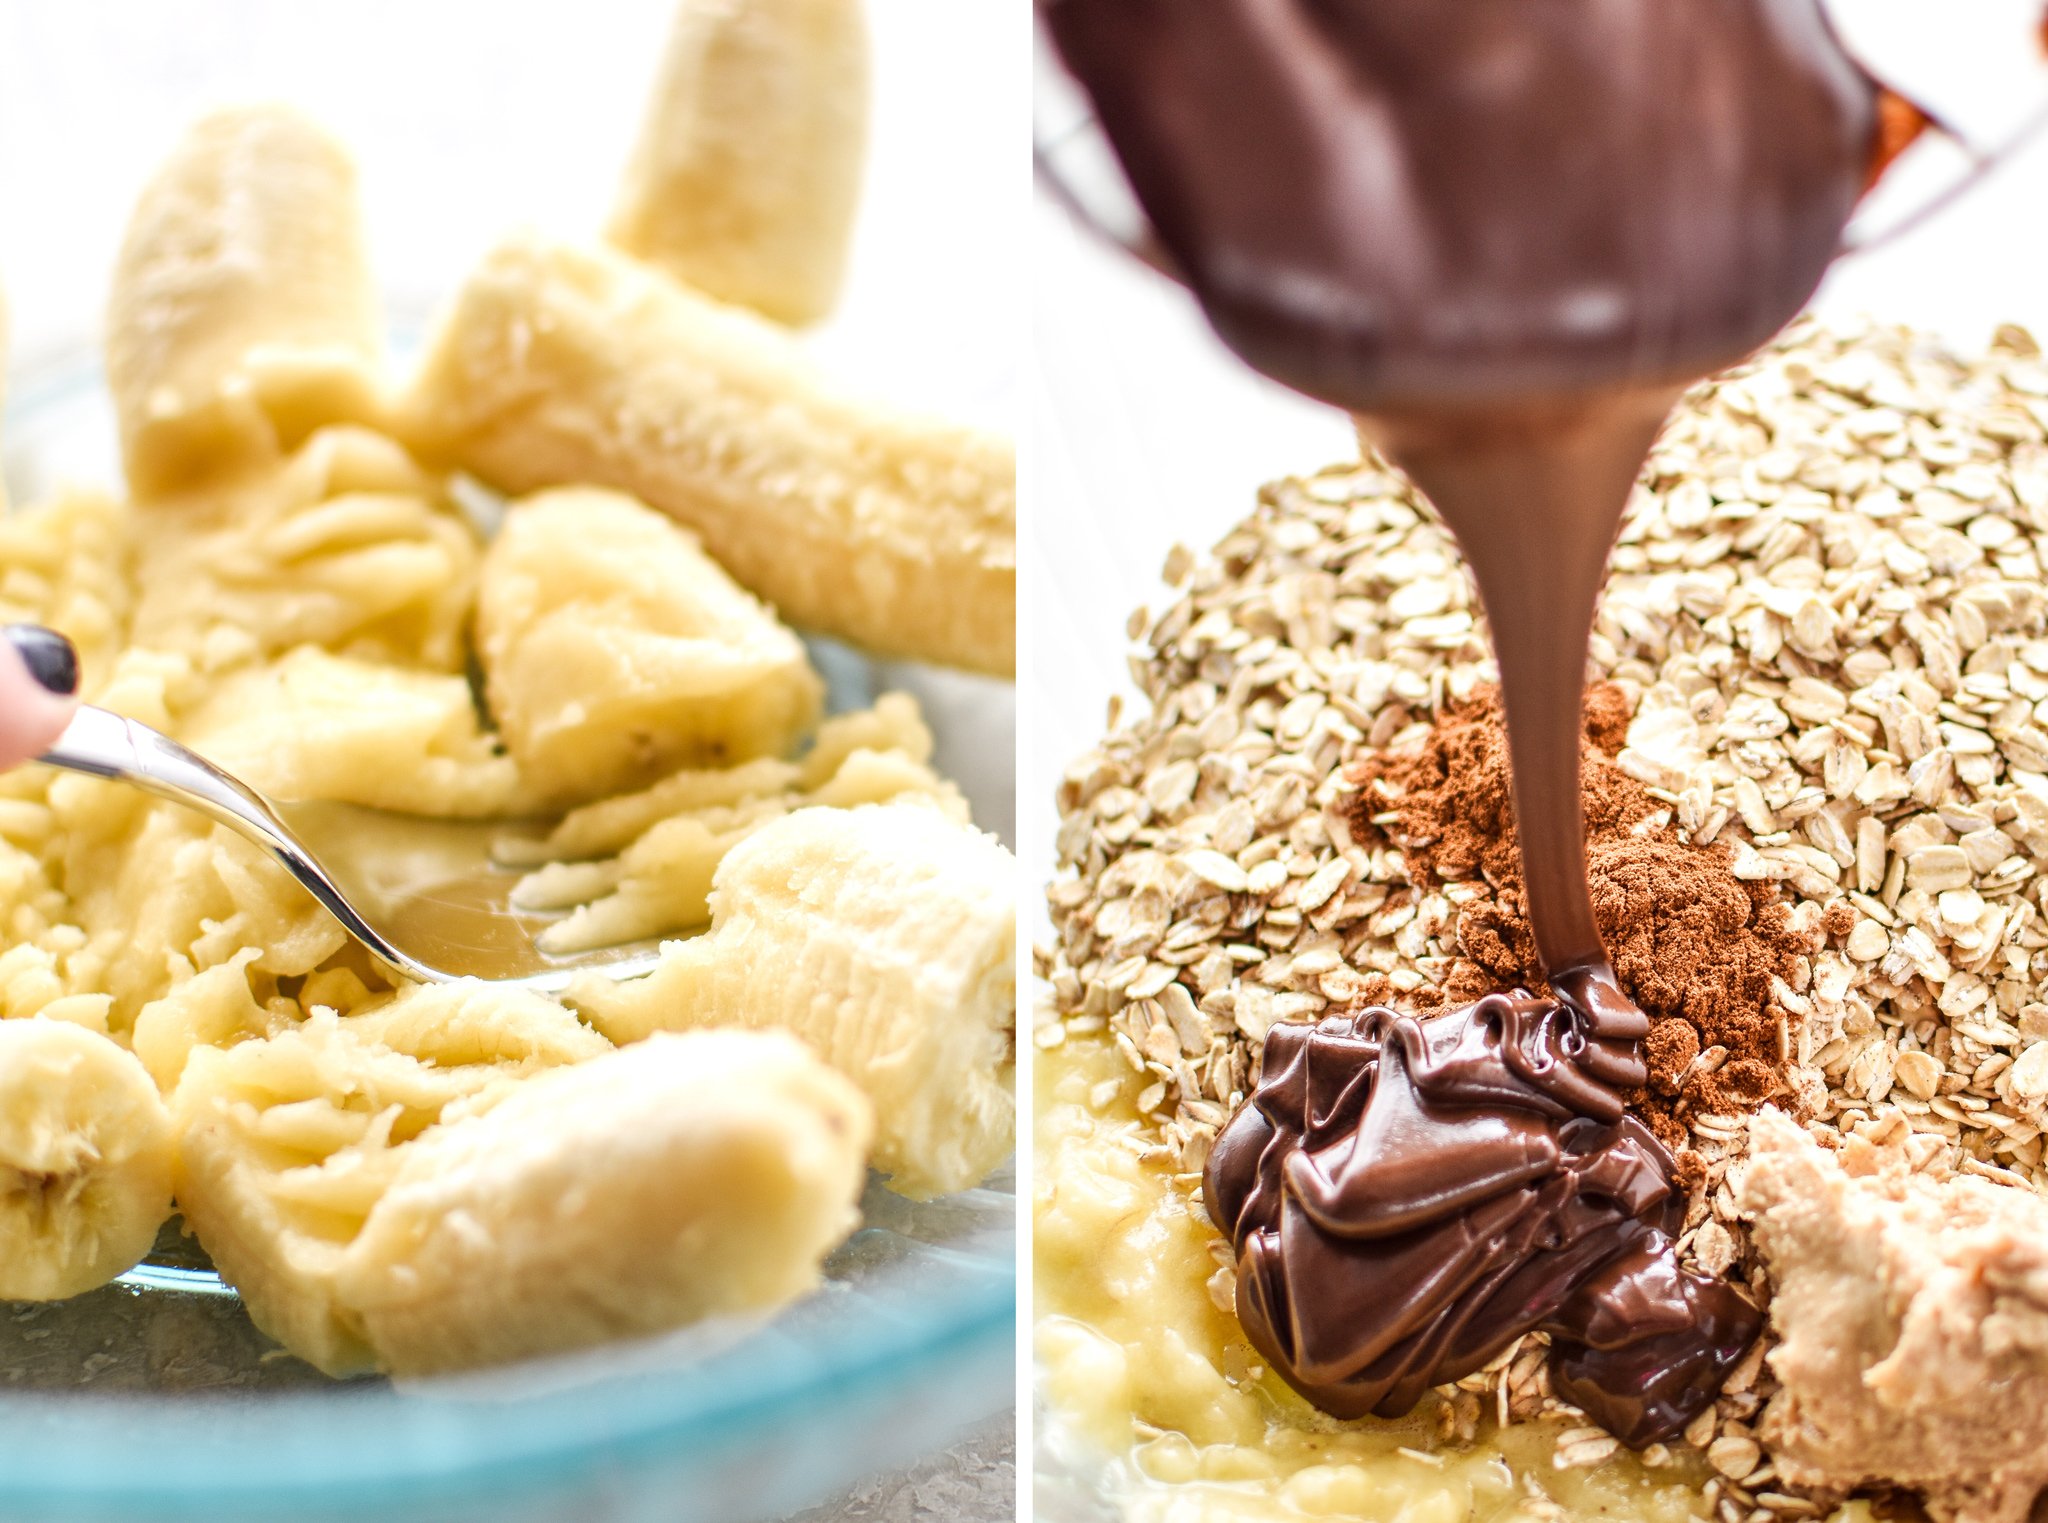 Left: Bananas being smooshed with a fork. Right: Ingredients for the banana chocolate oatmeal cookie mounds, pouring chocolate in the bowl.